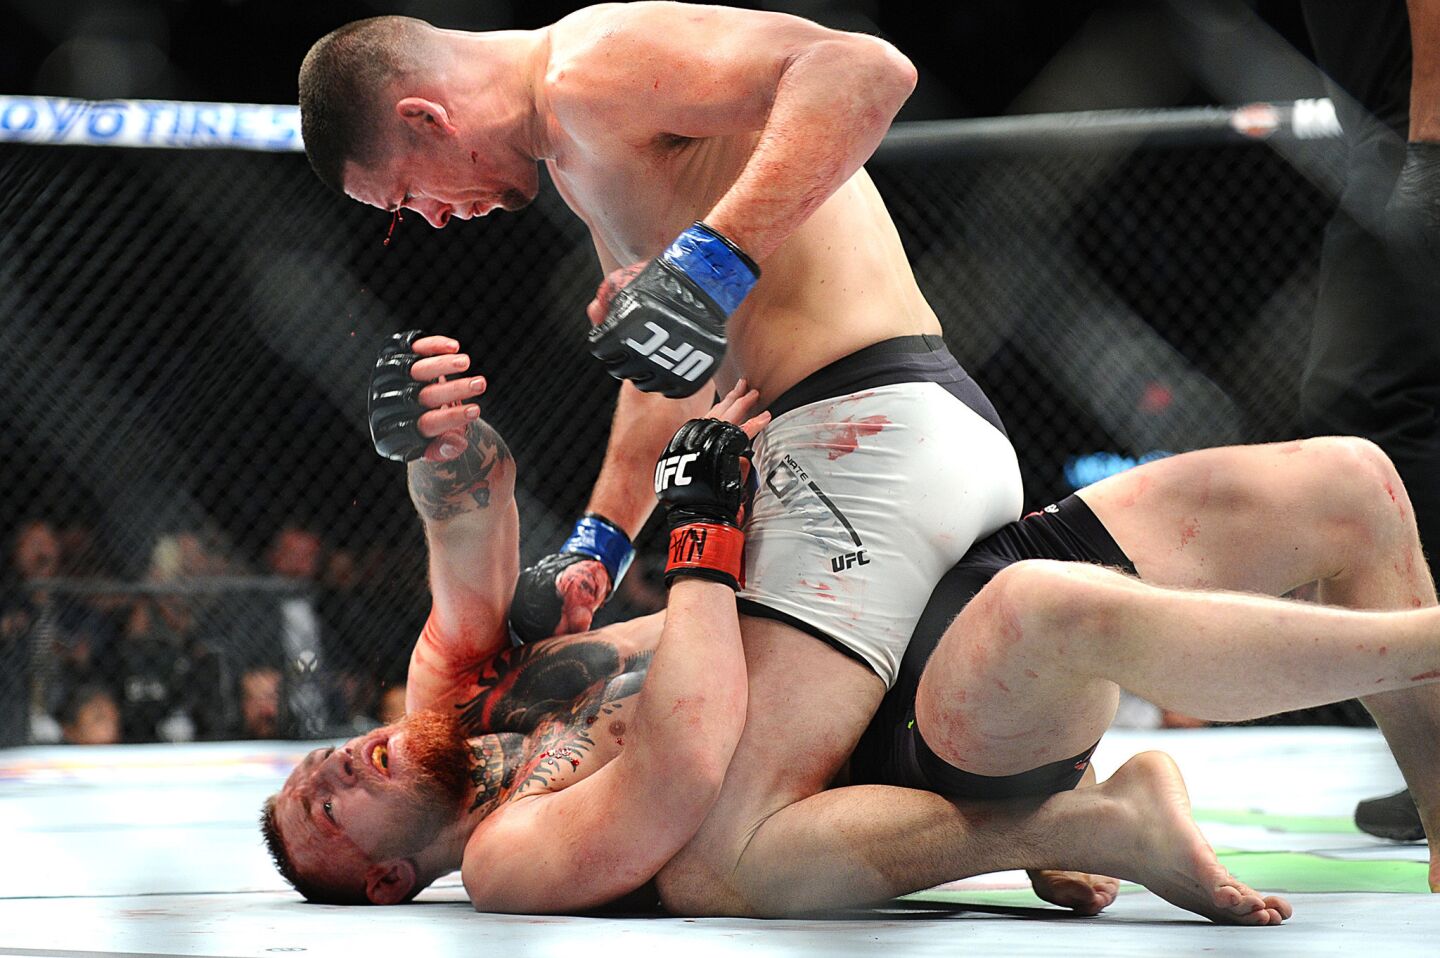 Nate Diaz takes down Conor McGregor during their non-title welterweight bout at UFC 196 in Las Vegas on March 5.